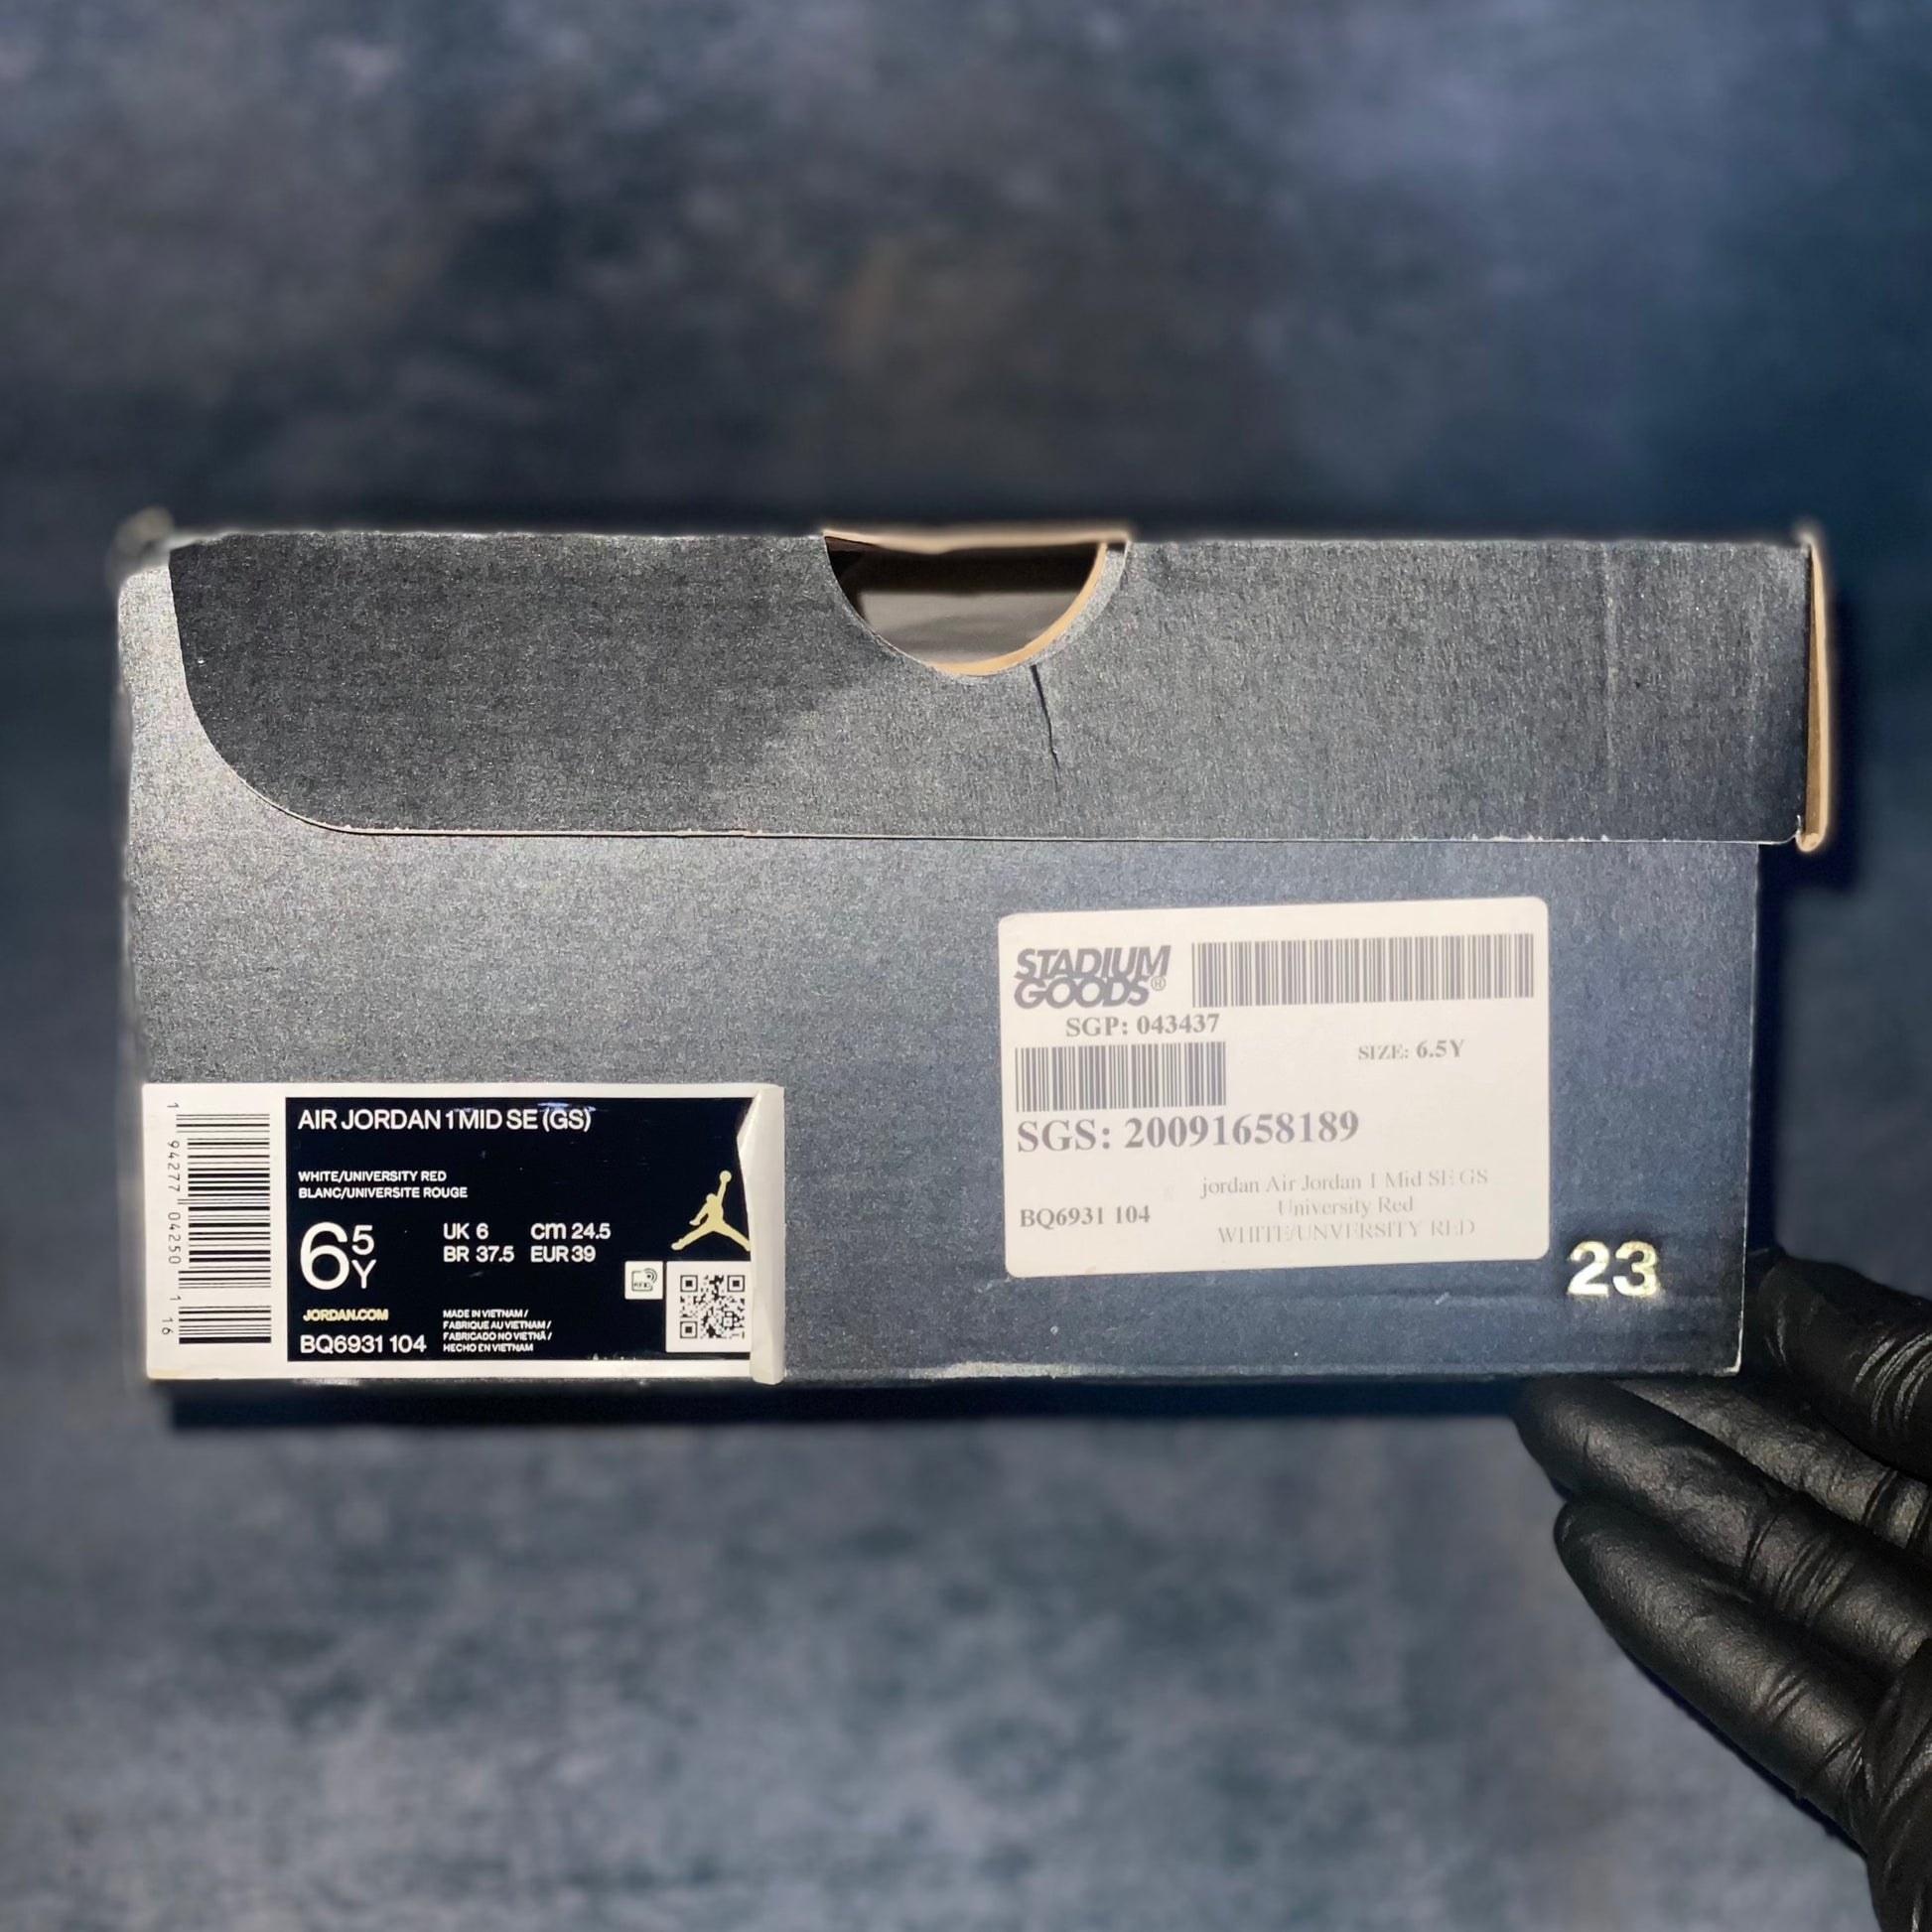 Black Air Jordan 1 Mid sneaker box with the barcode, style code, size, and other sneaker information on a label.